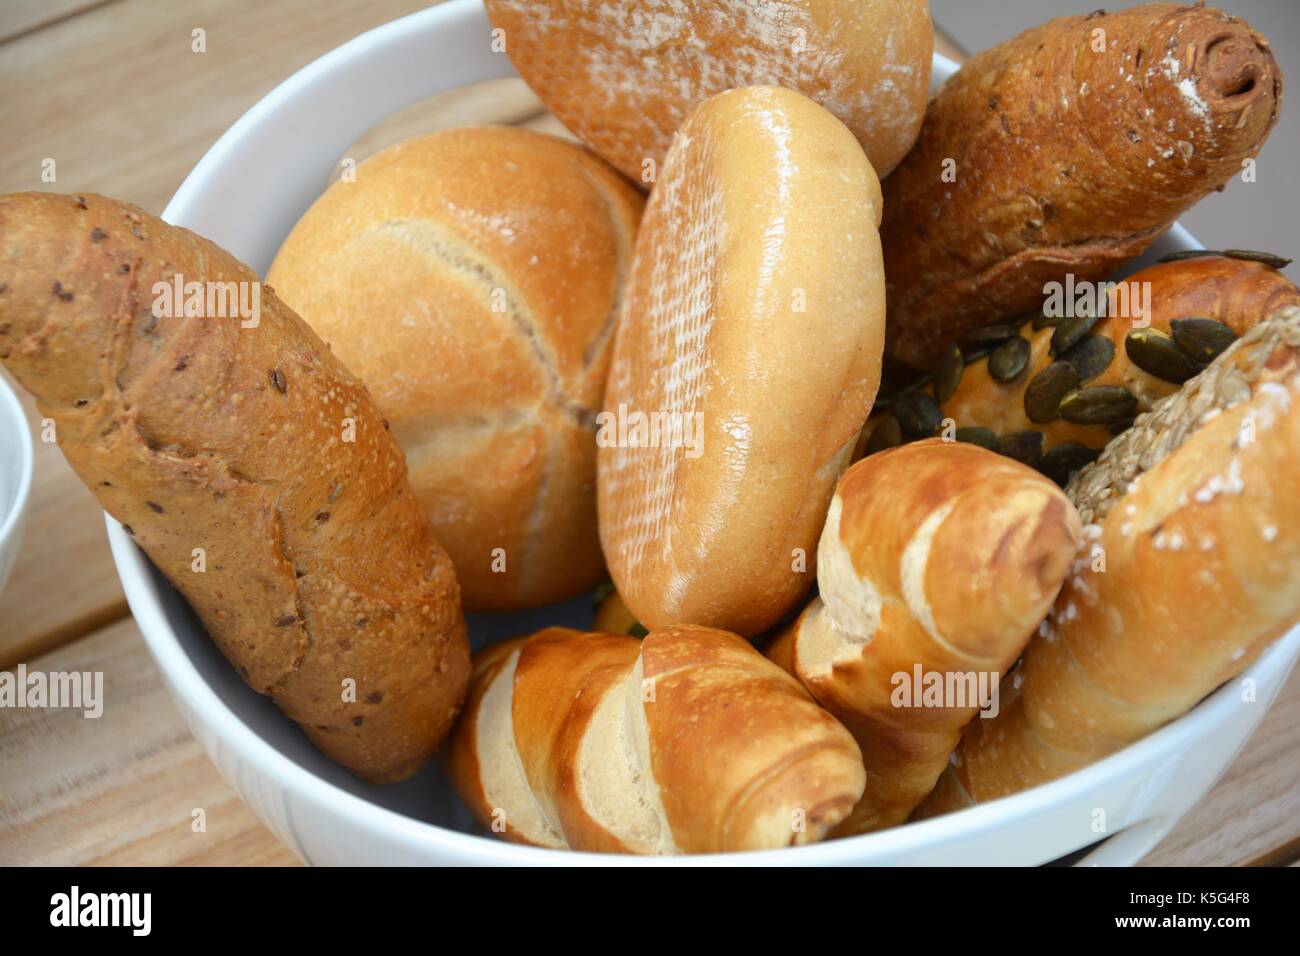 Bread roll topview position close up photo Stock Photo